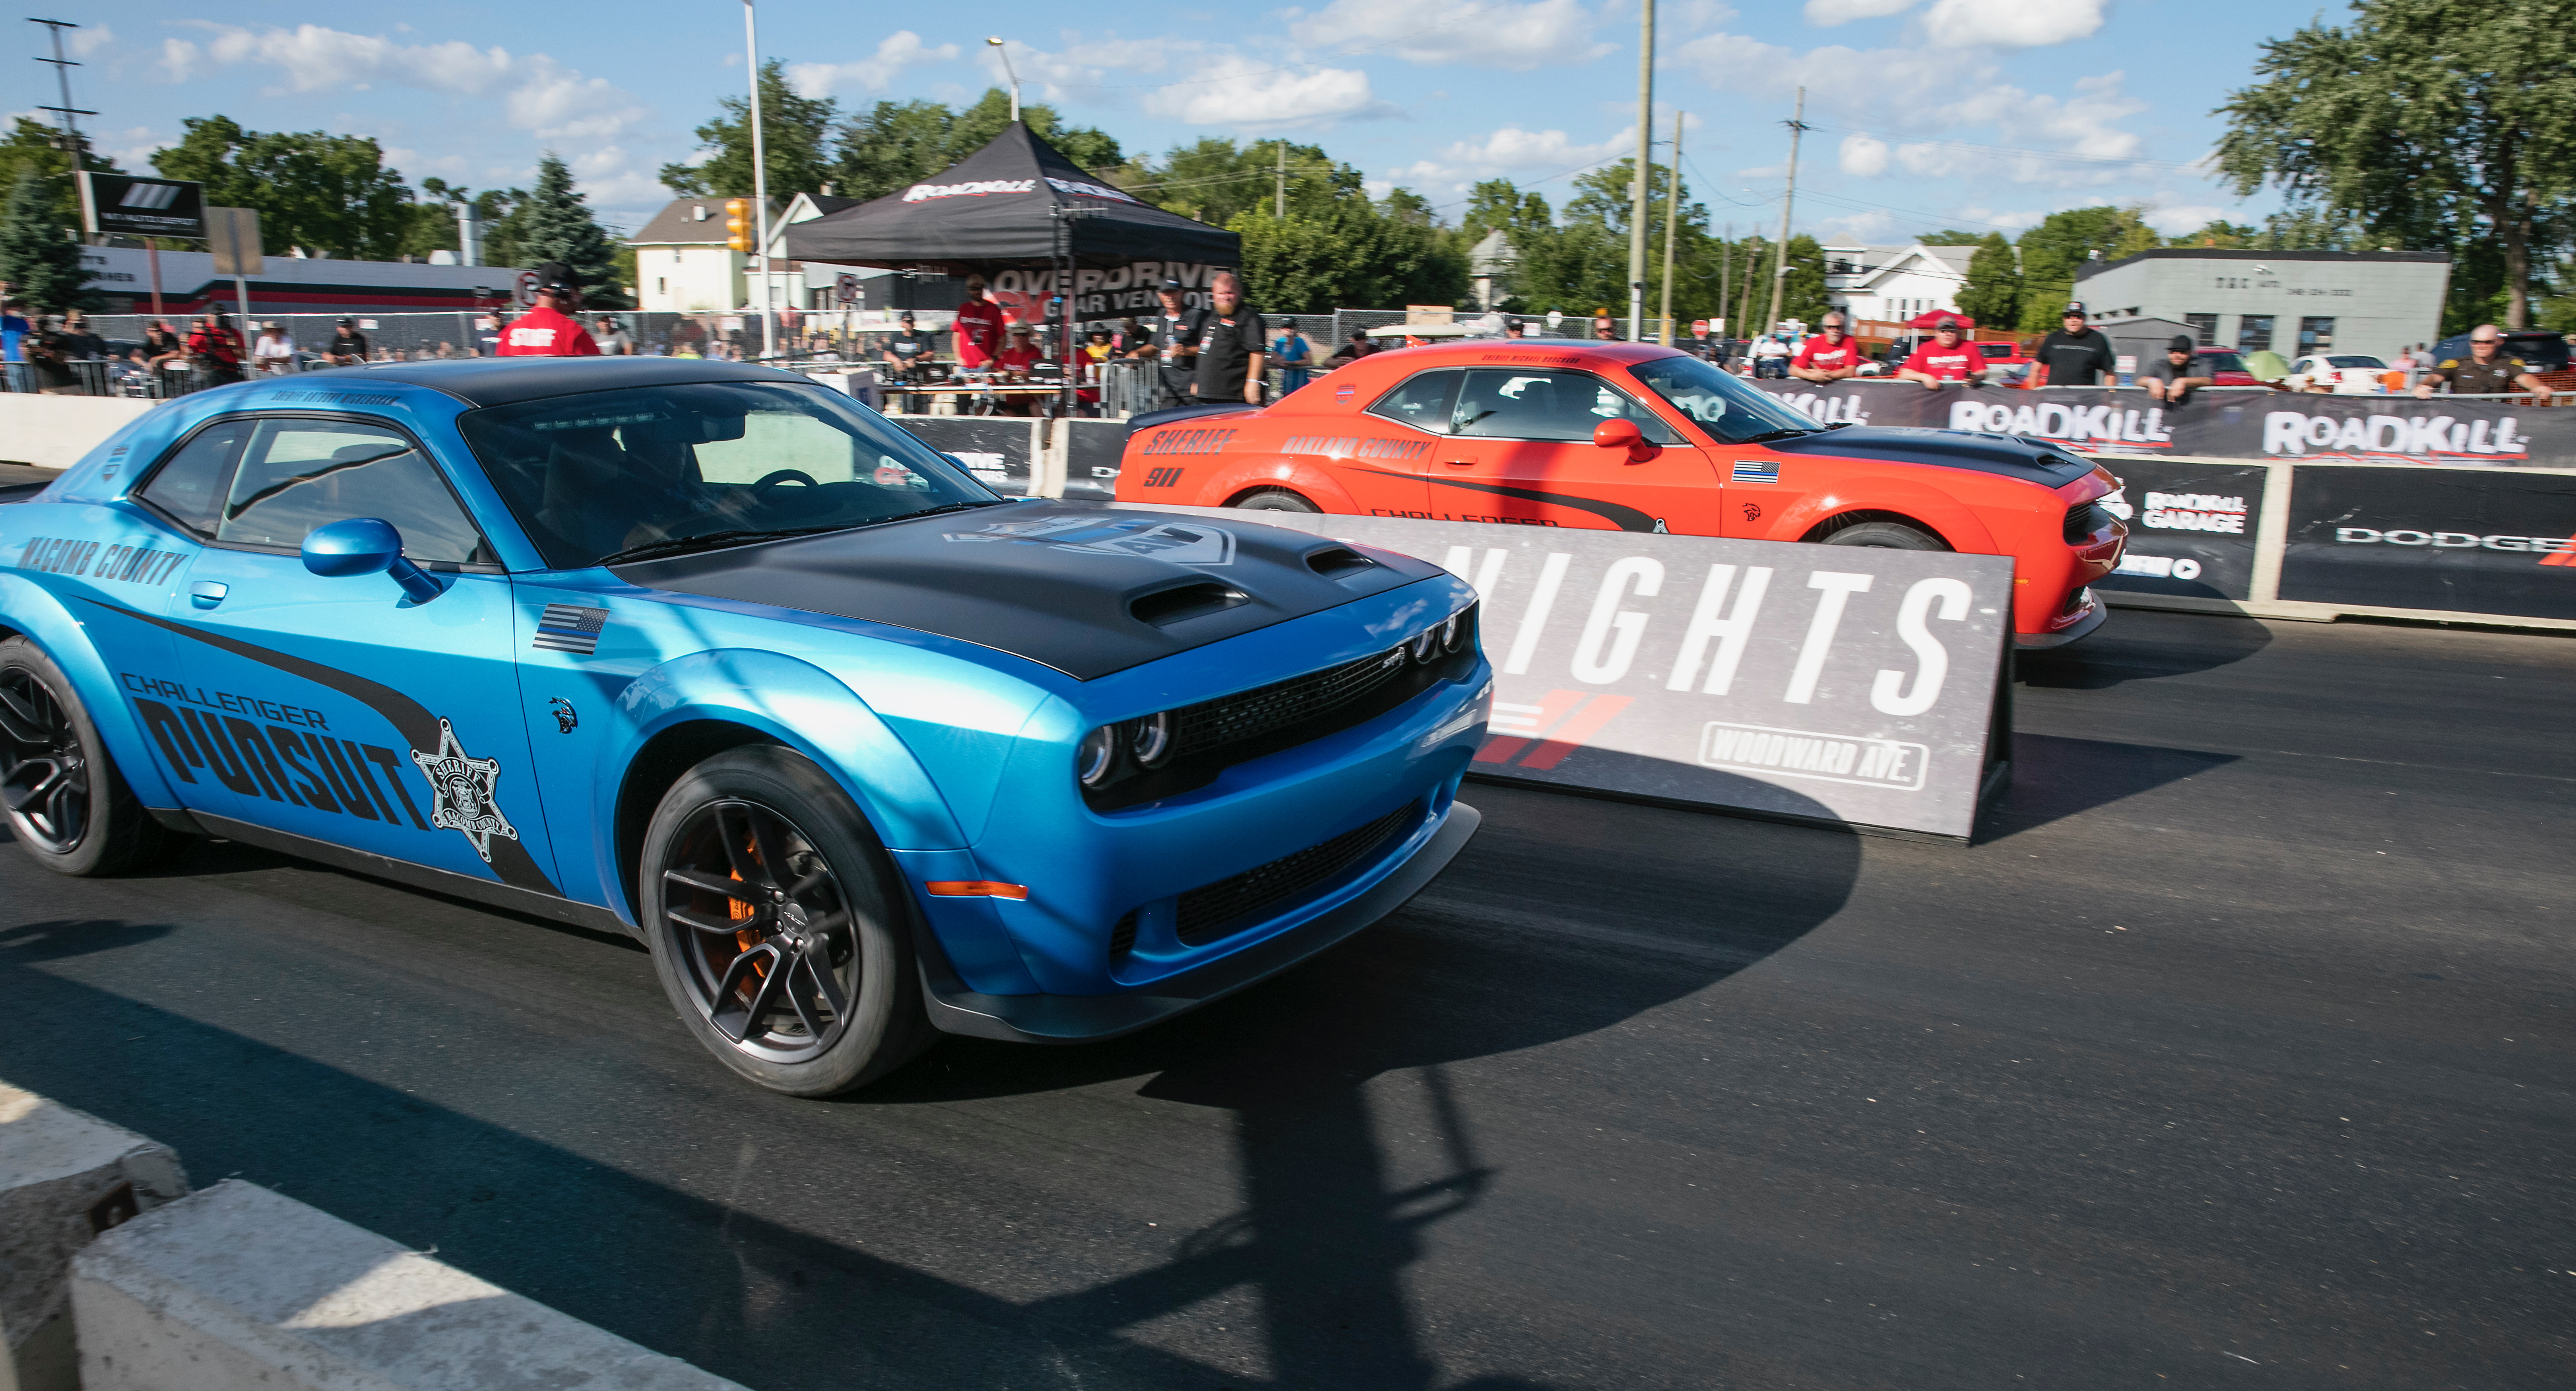 drag racing, Legal drag racing on Woodward Avenue draws thousands, ClassicCars.com Journal